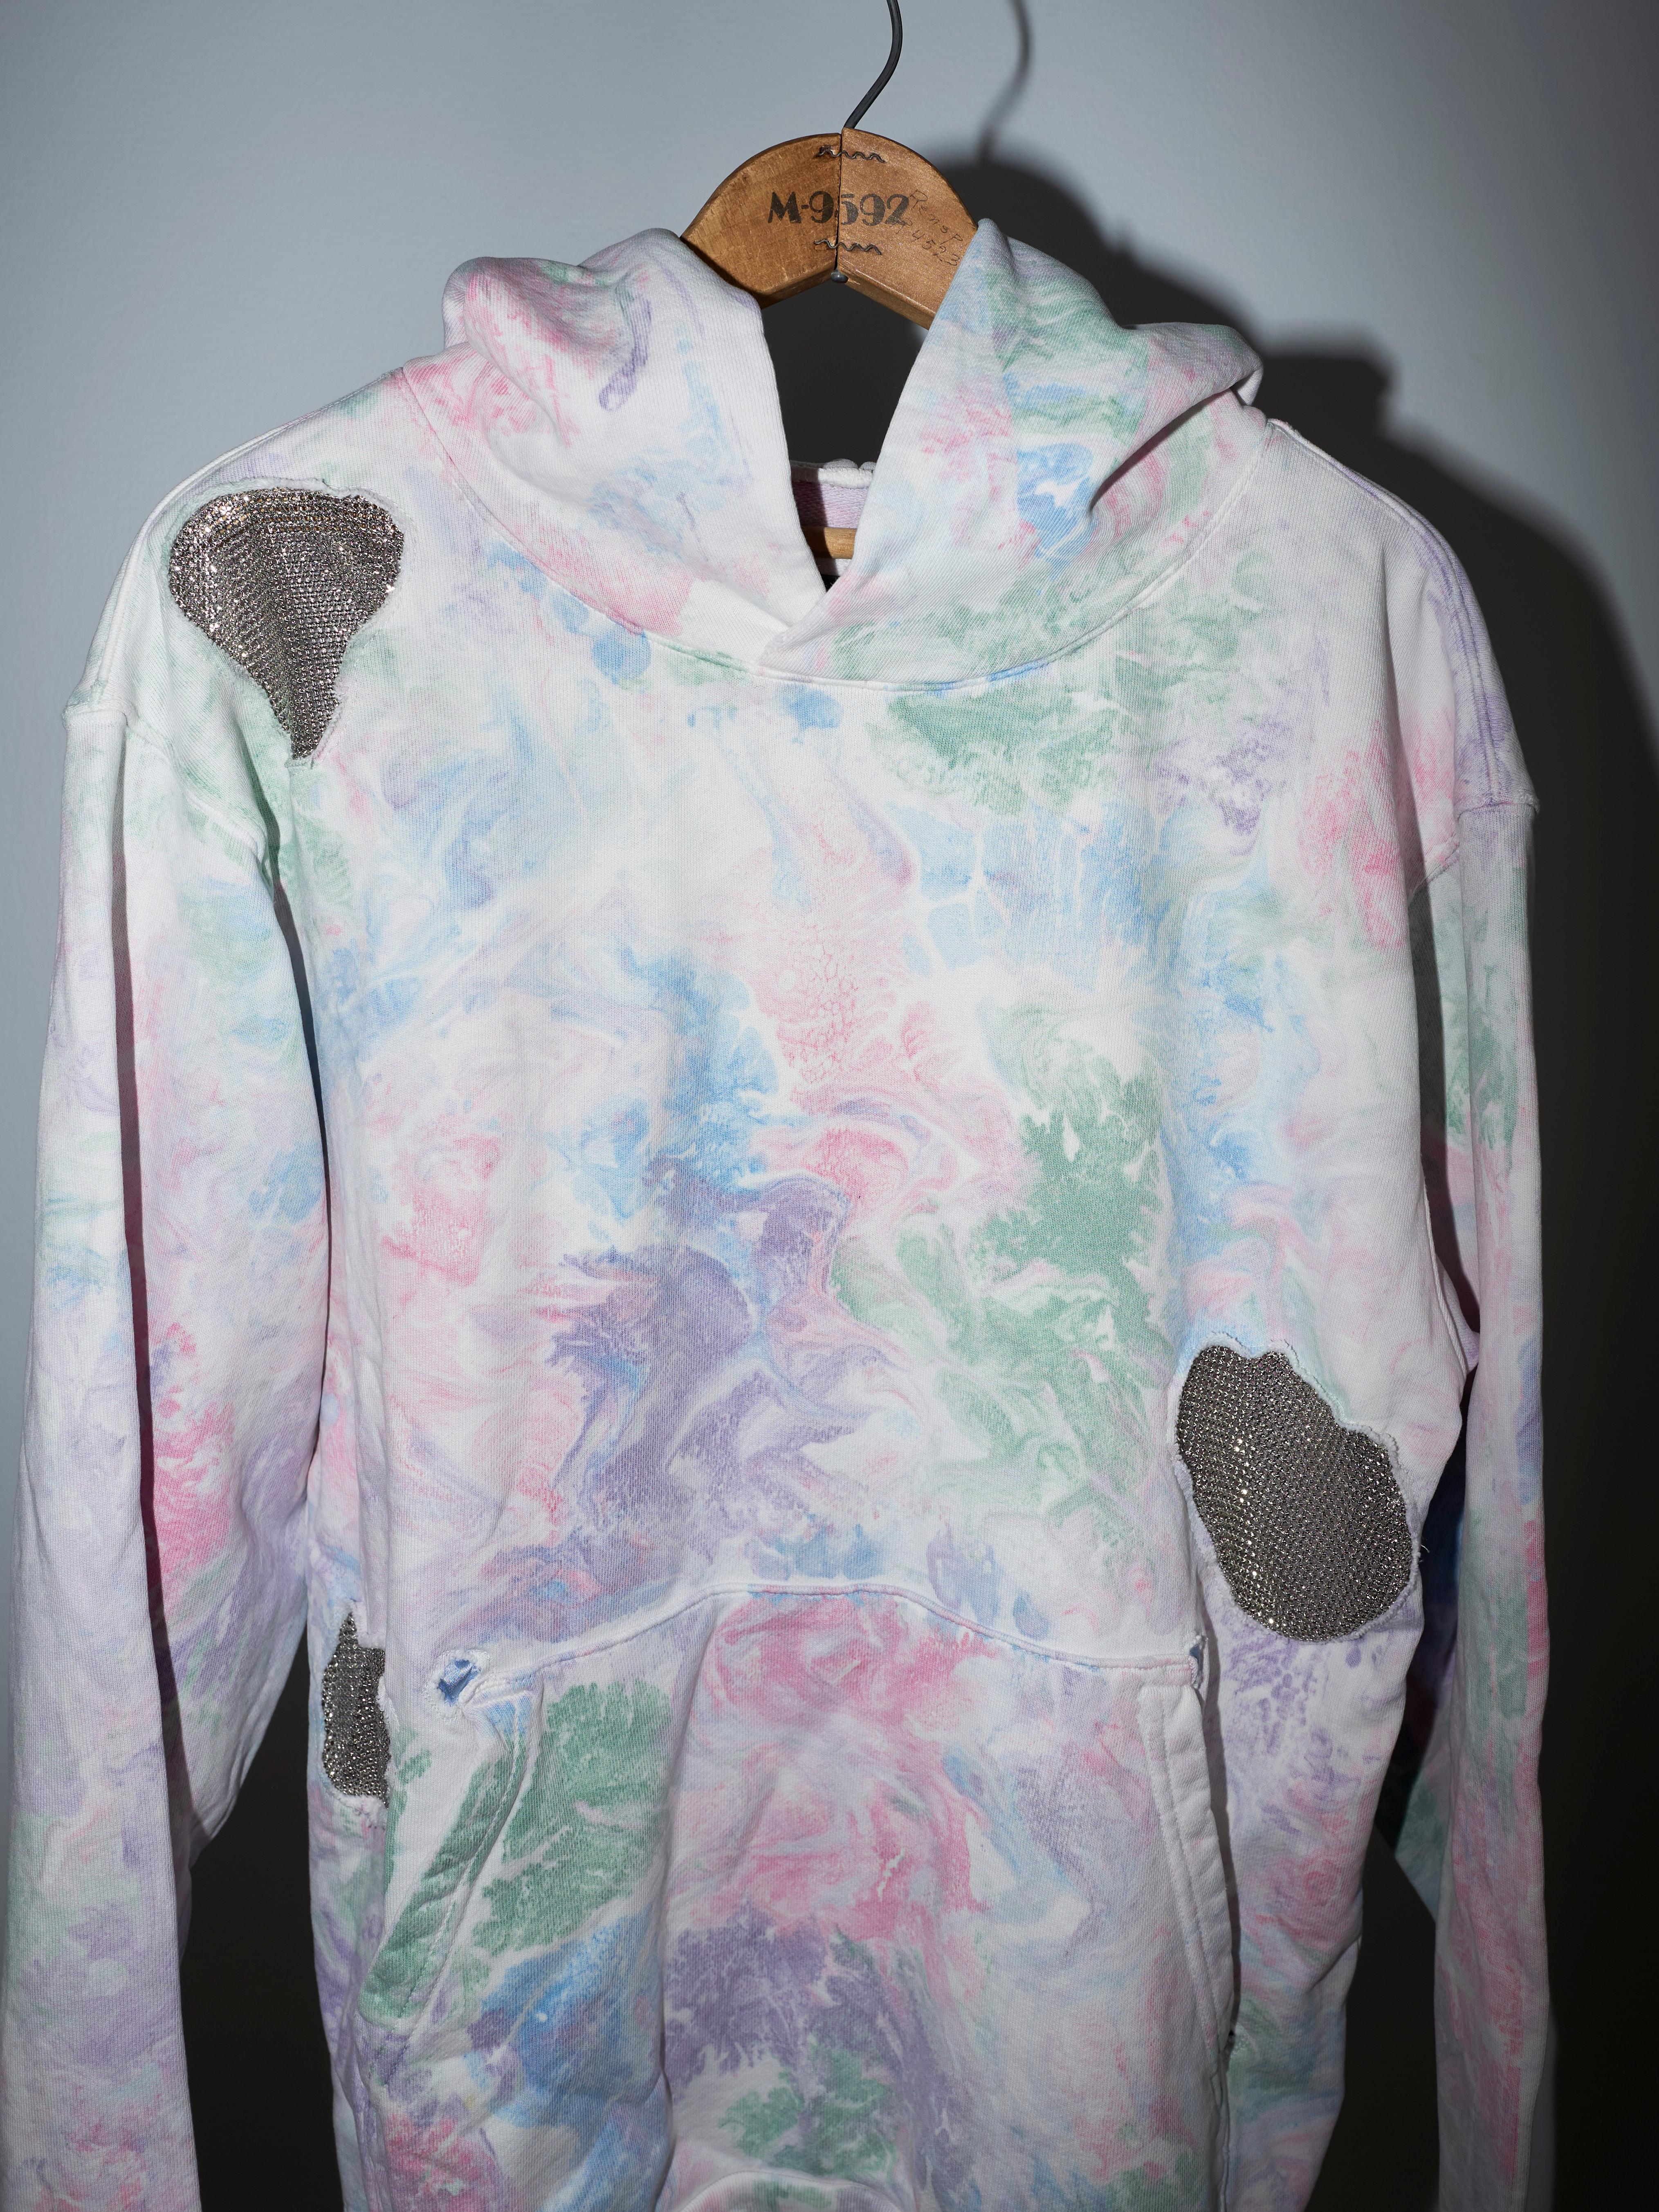 Hoodie Pastel Marble Cotton Embellished Chain Patchwork J Dauphin For Sale 4